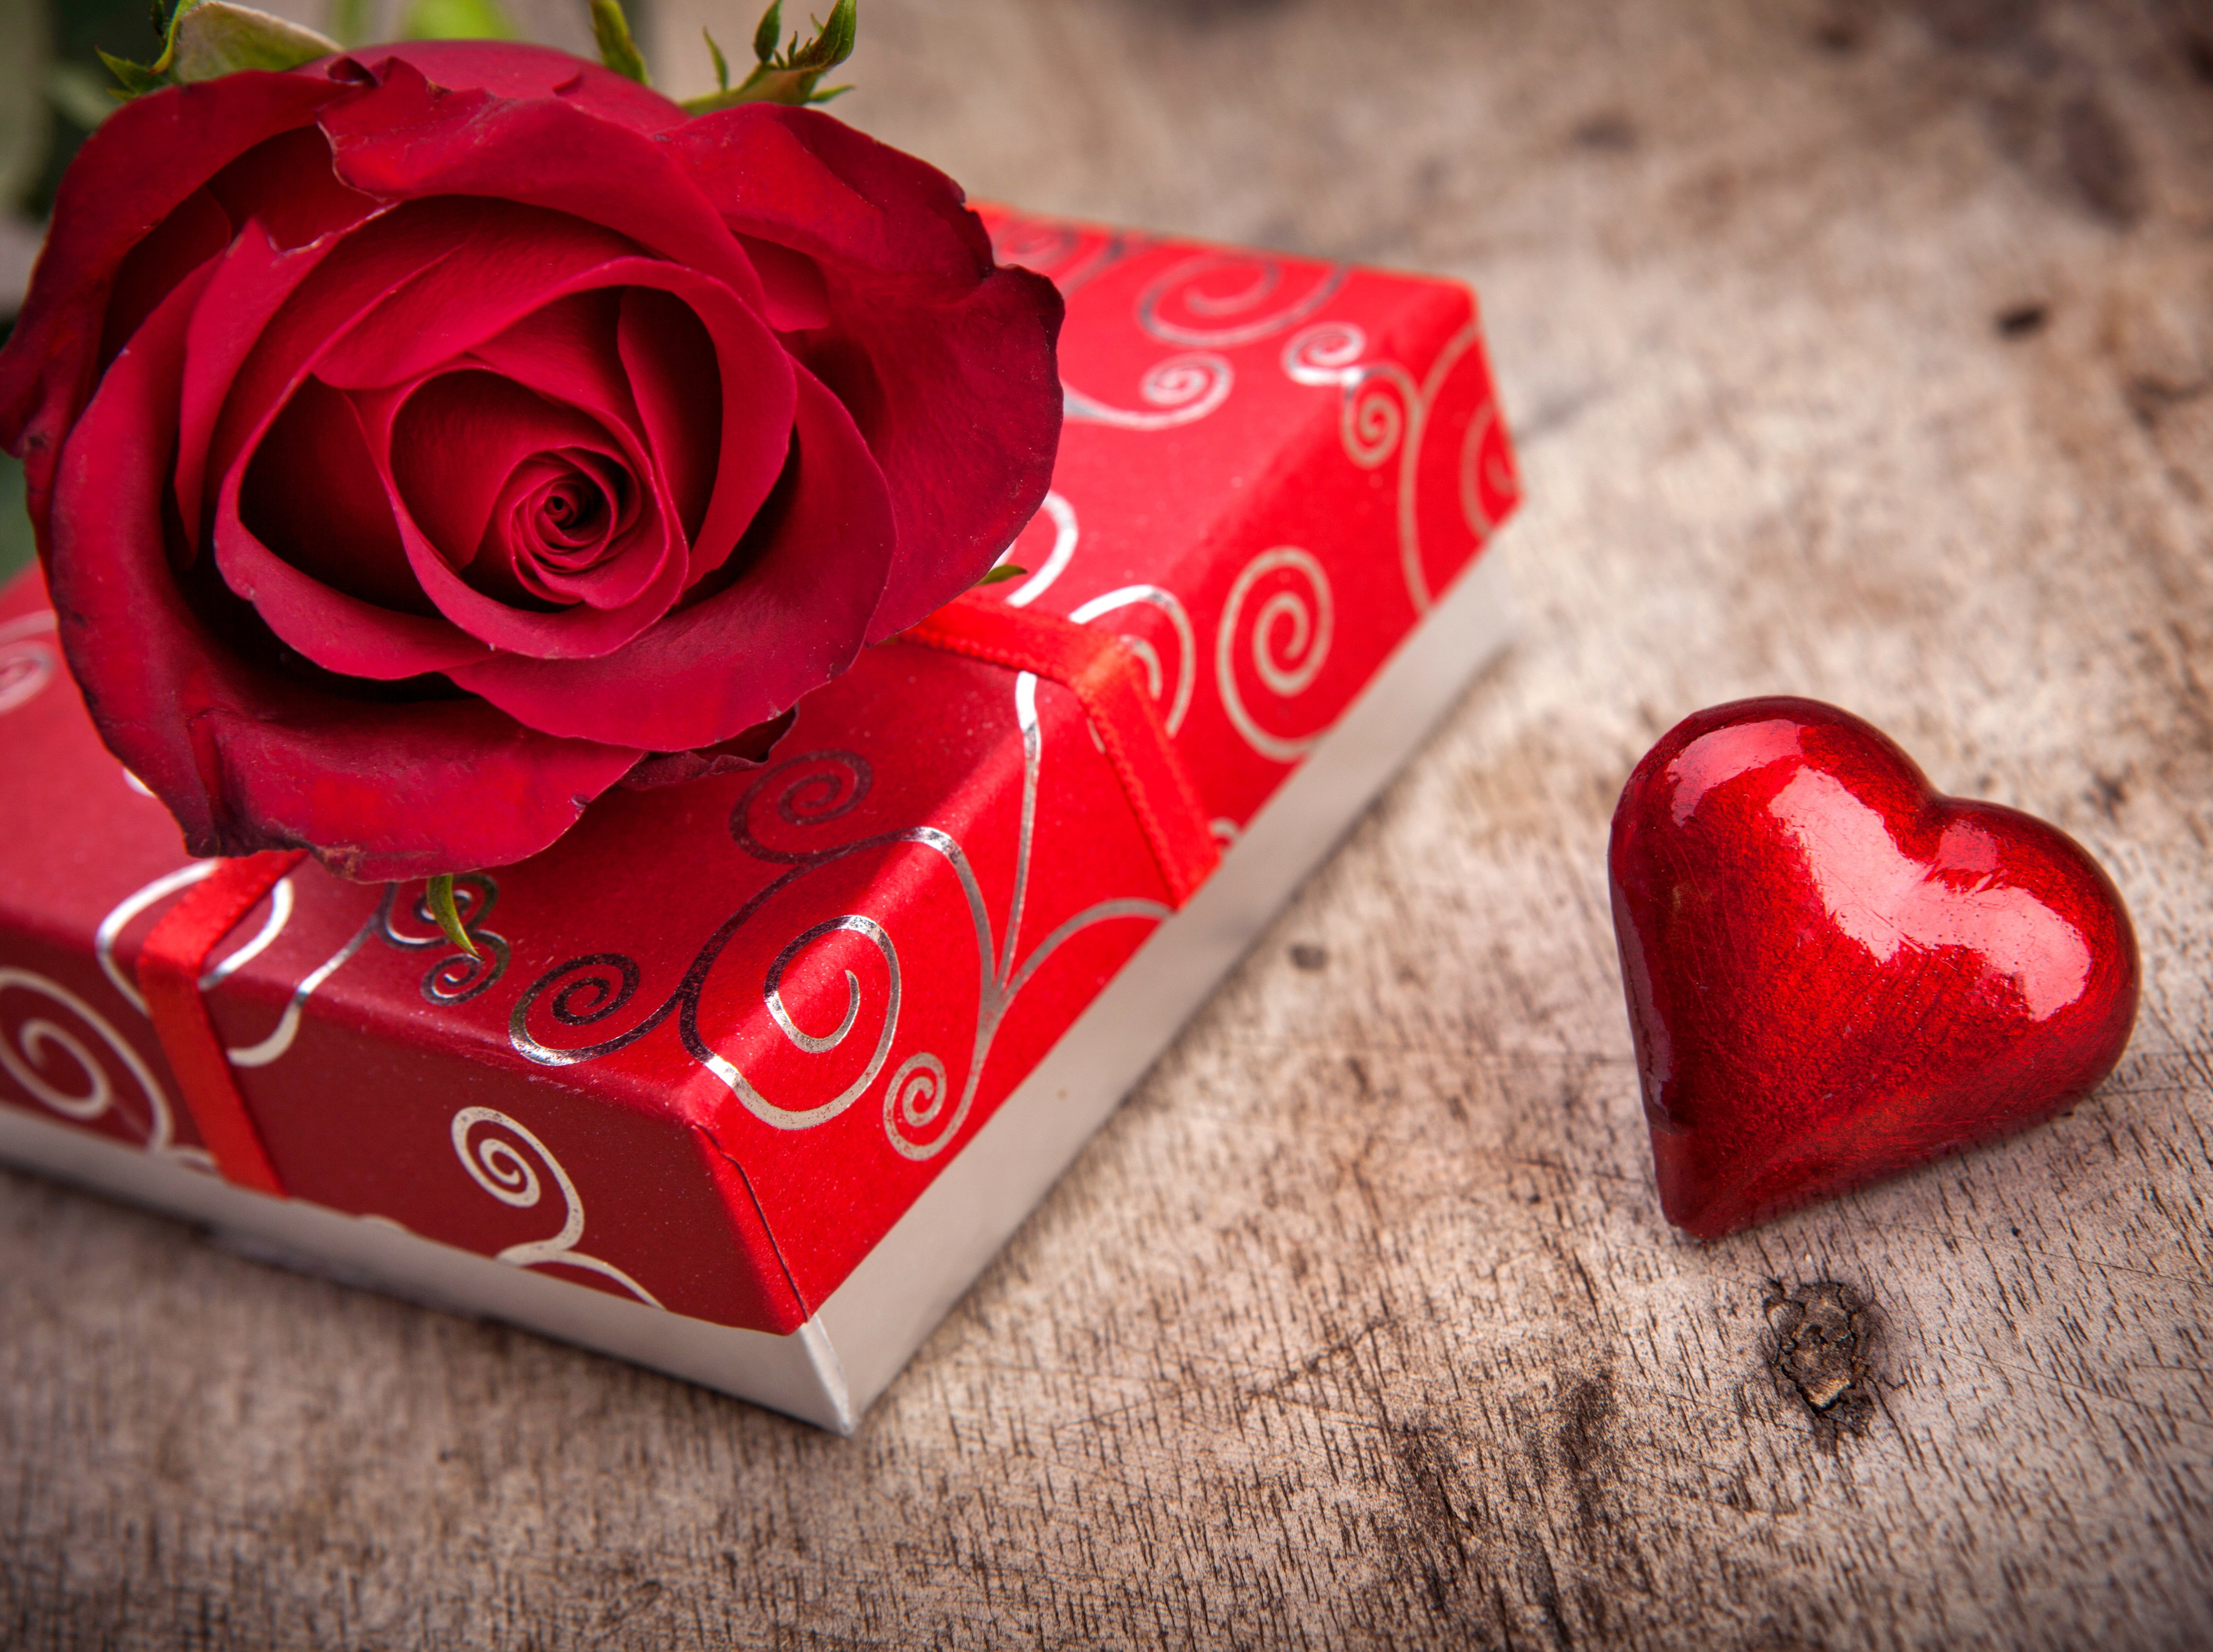 rose, Flowers, Red, Love, Romance, Life, For, Chocolate, Gift, Couple, Heart Wallpaper